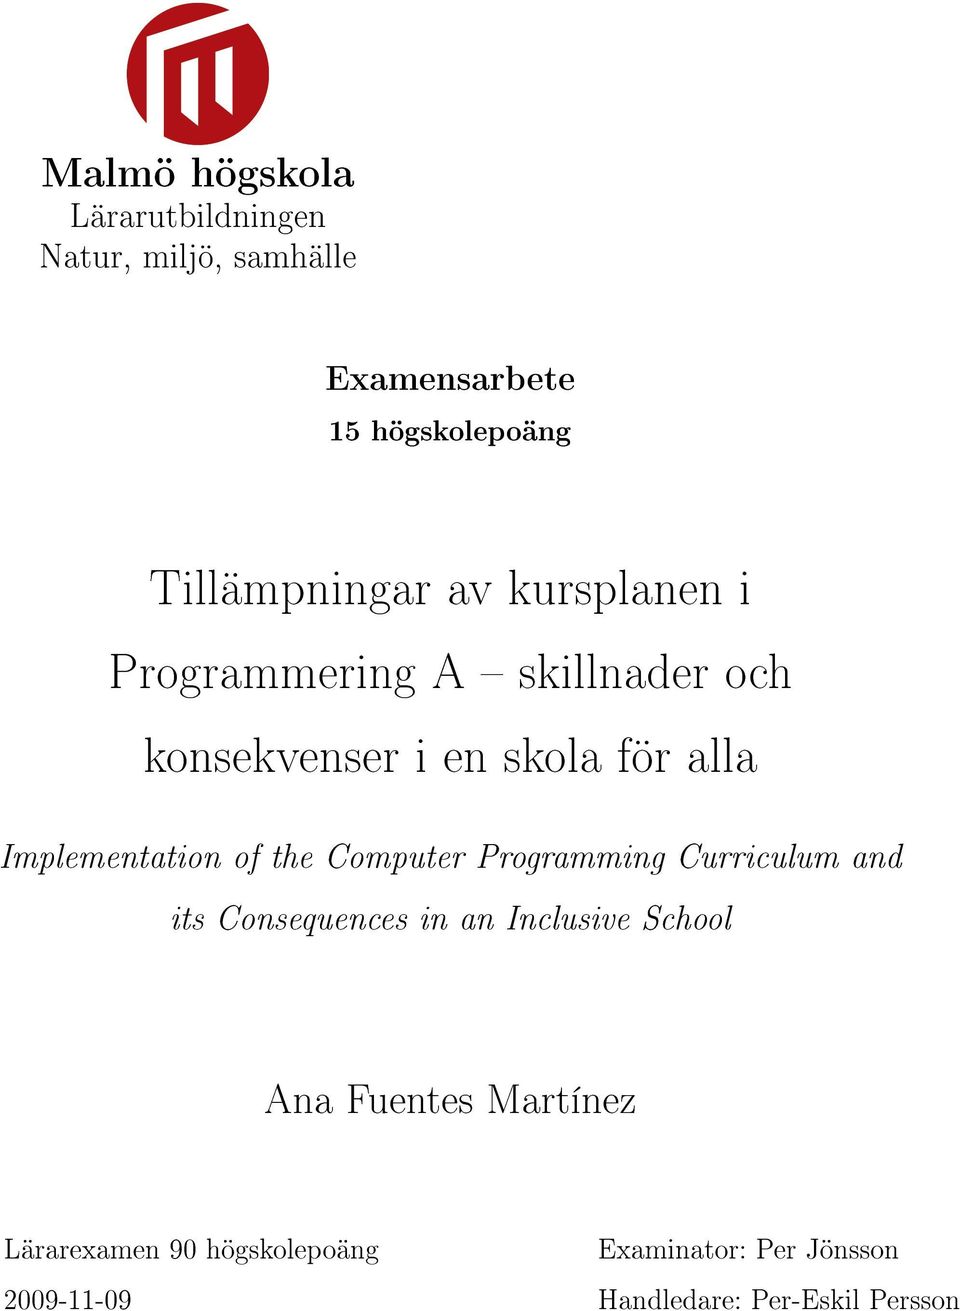 Implementation of the Computer Programming Curriculum and its Consequences in an Inclusive School